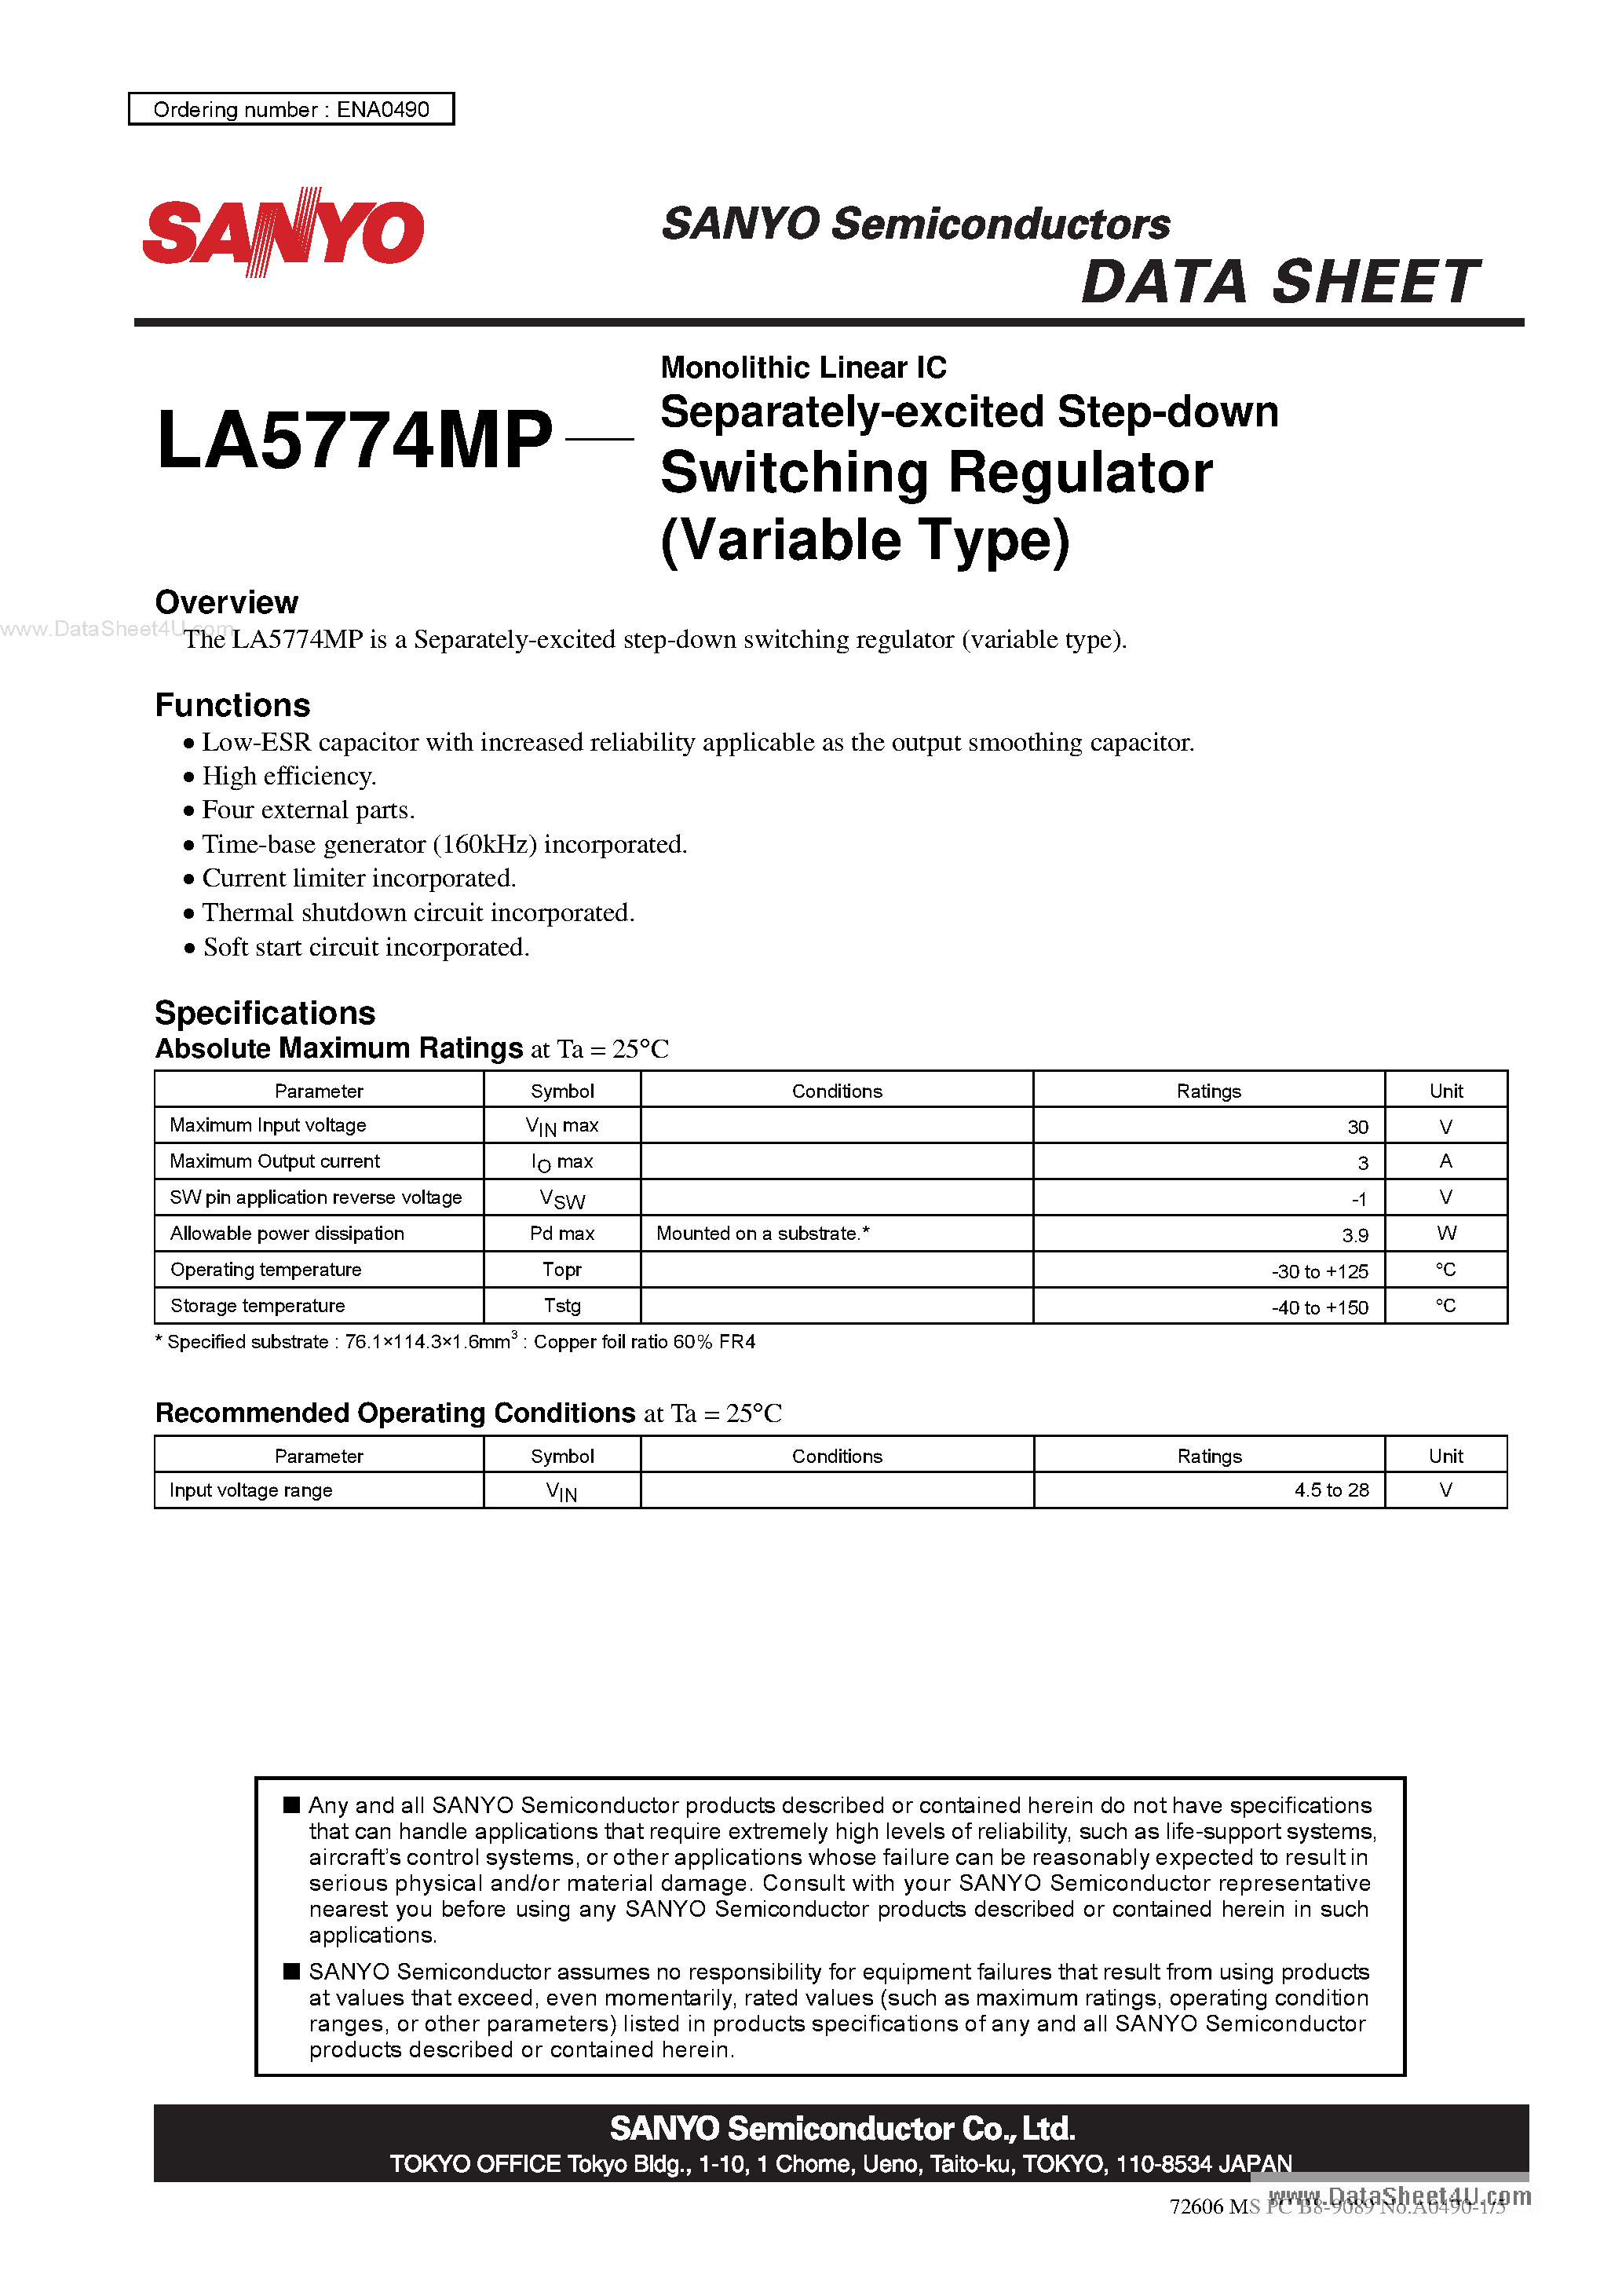 Даташит LA5774MP-Monolithic Linear IC Separately-Excited Step-Down Switching Regulator страница 1